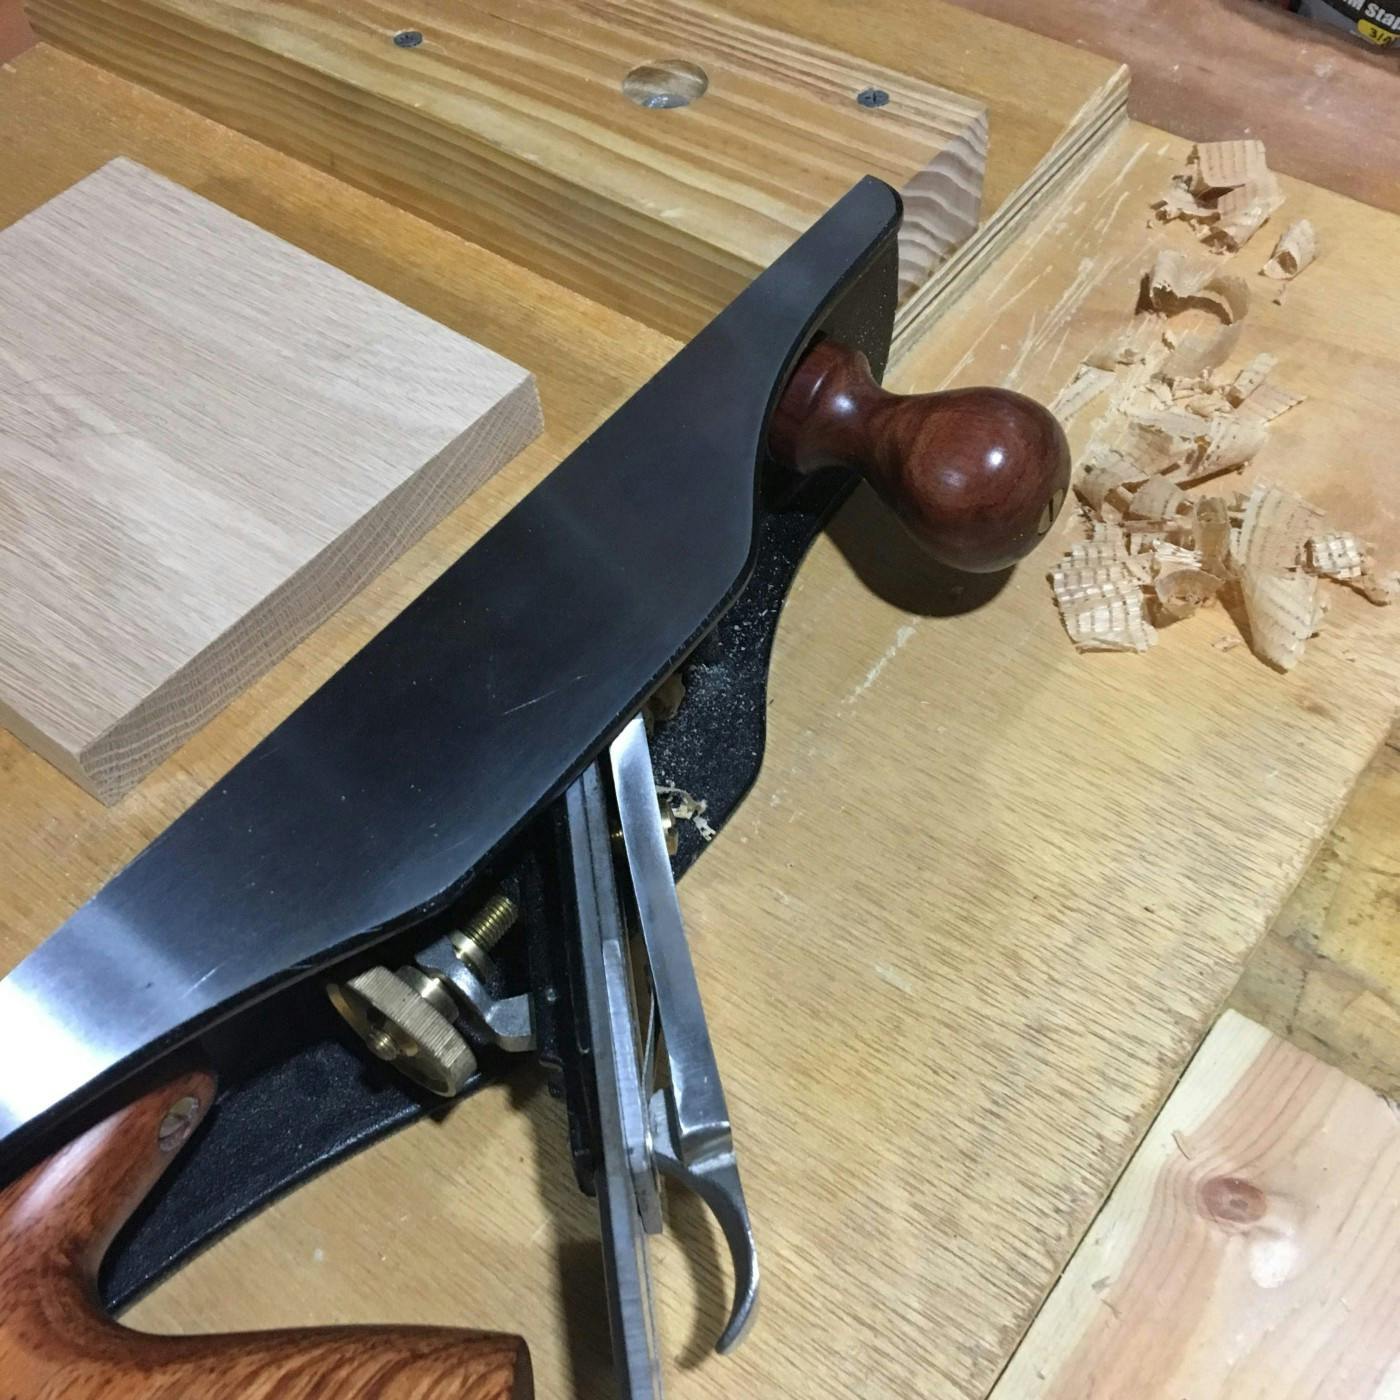 A wood table with a wood working tool and some wood shavings.